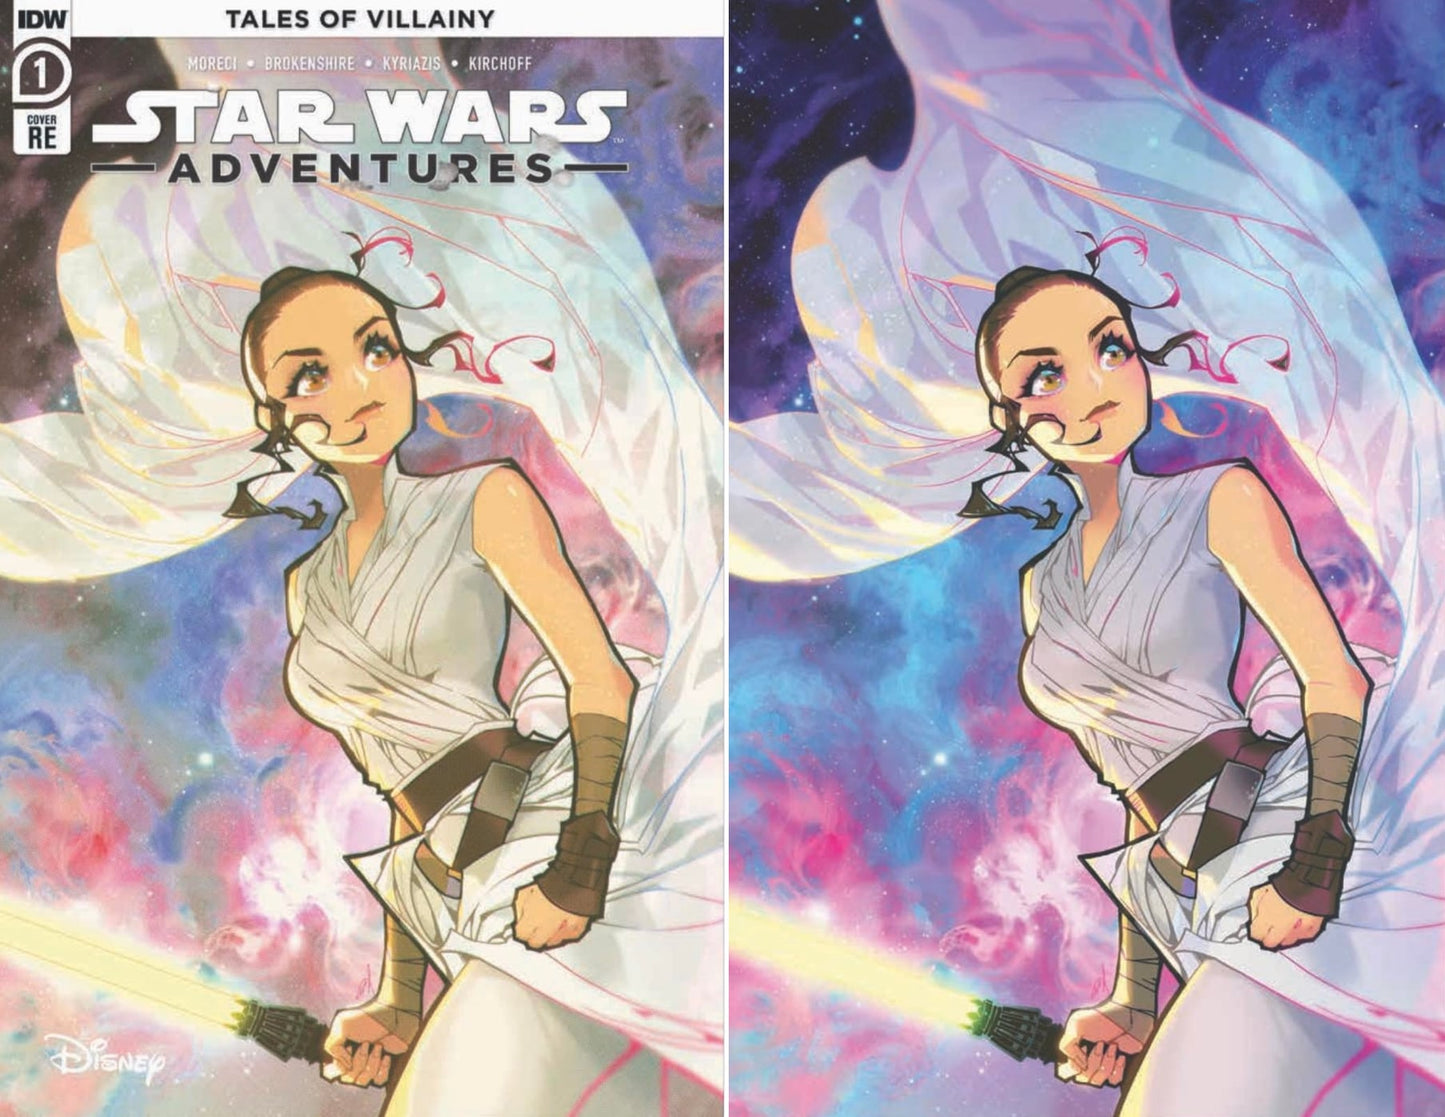 STAR WARS ADVENTURES (2020) #1 ROSE BESCH TRADE/C2E2 VIRGIN VARIANT LIMITED TO 1500 SETS WITH NUMBERED COA